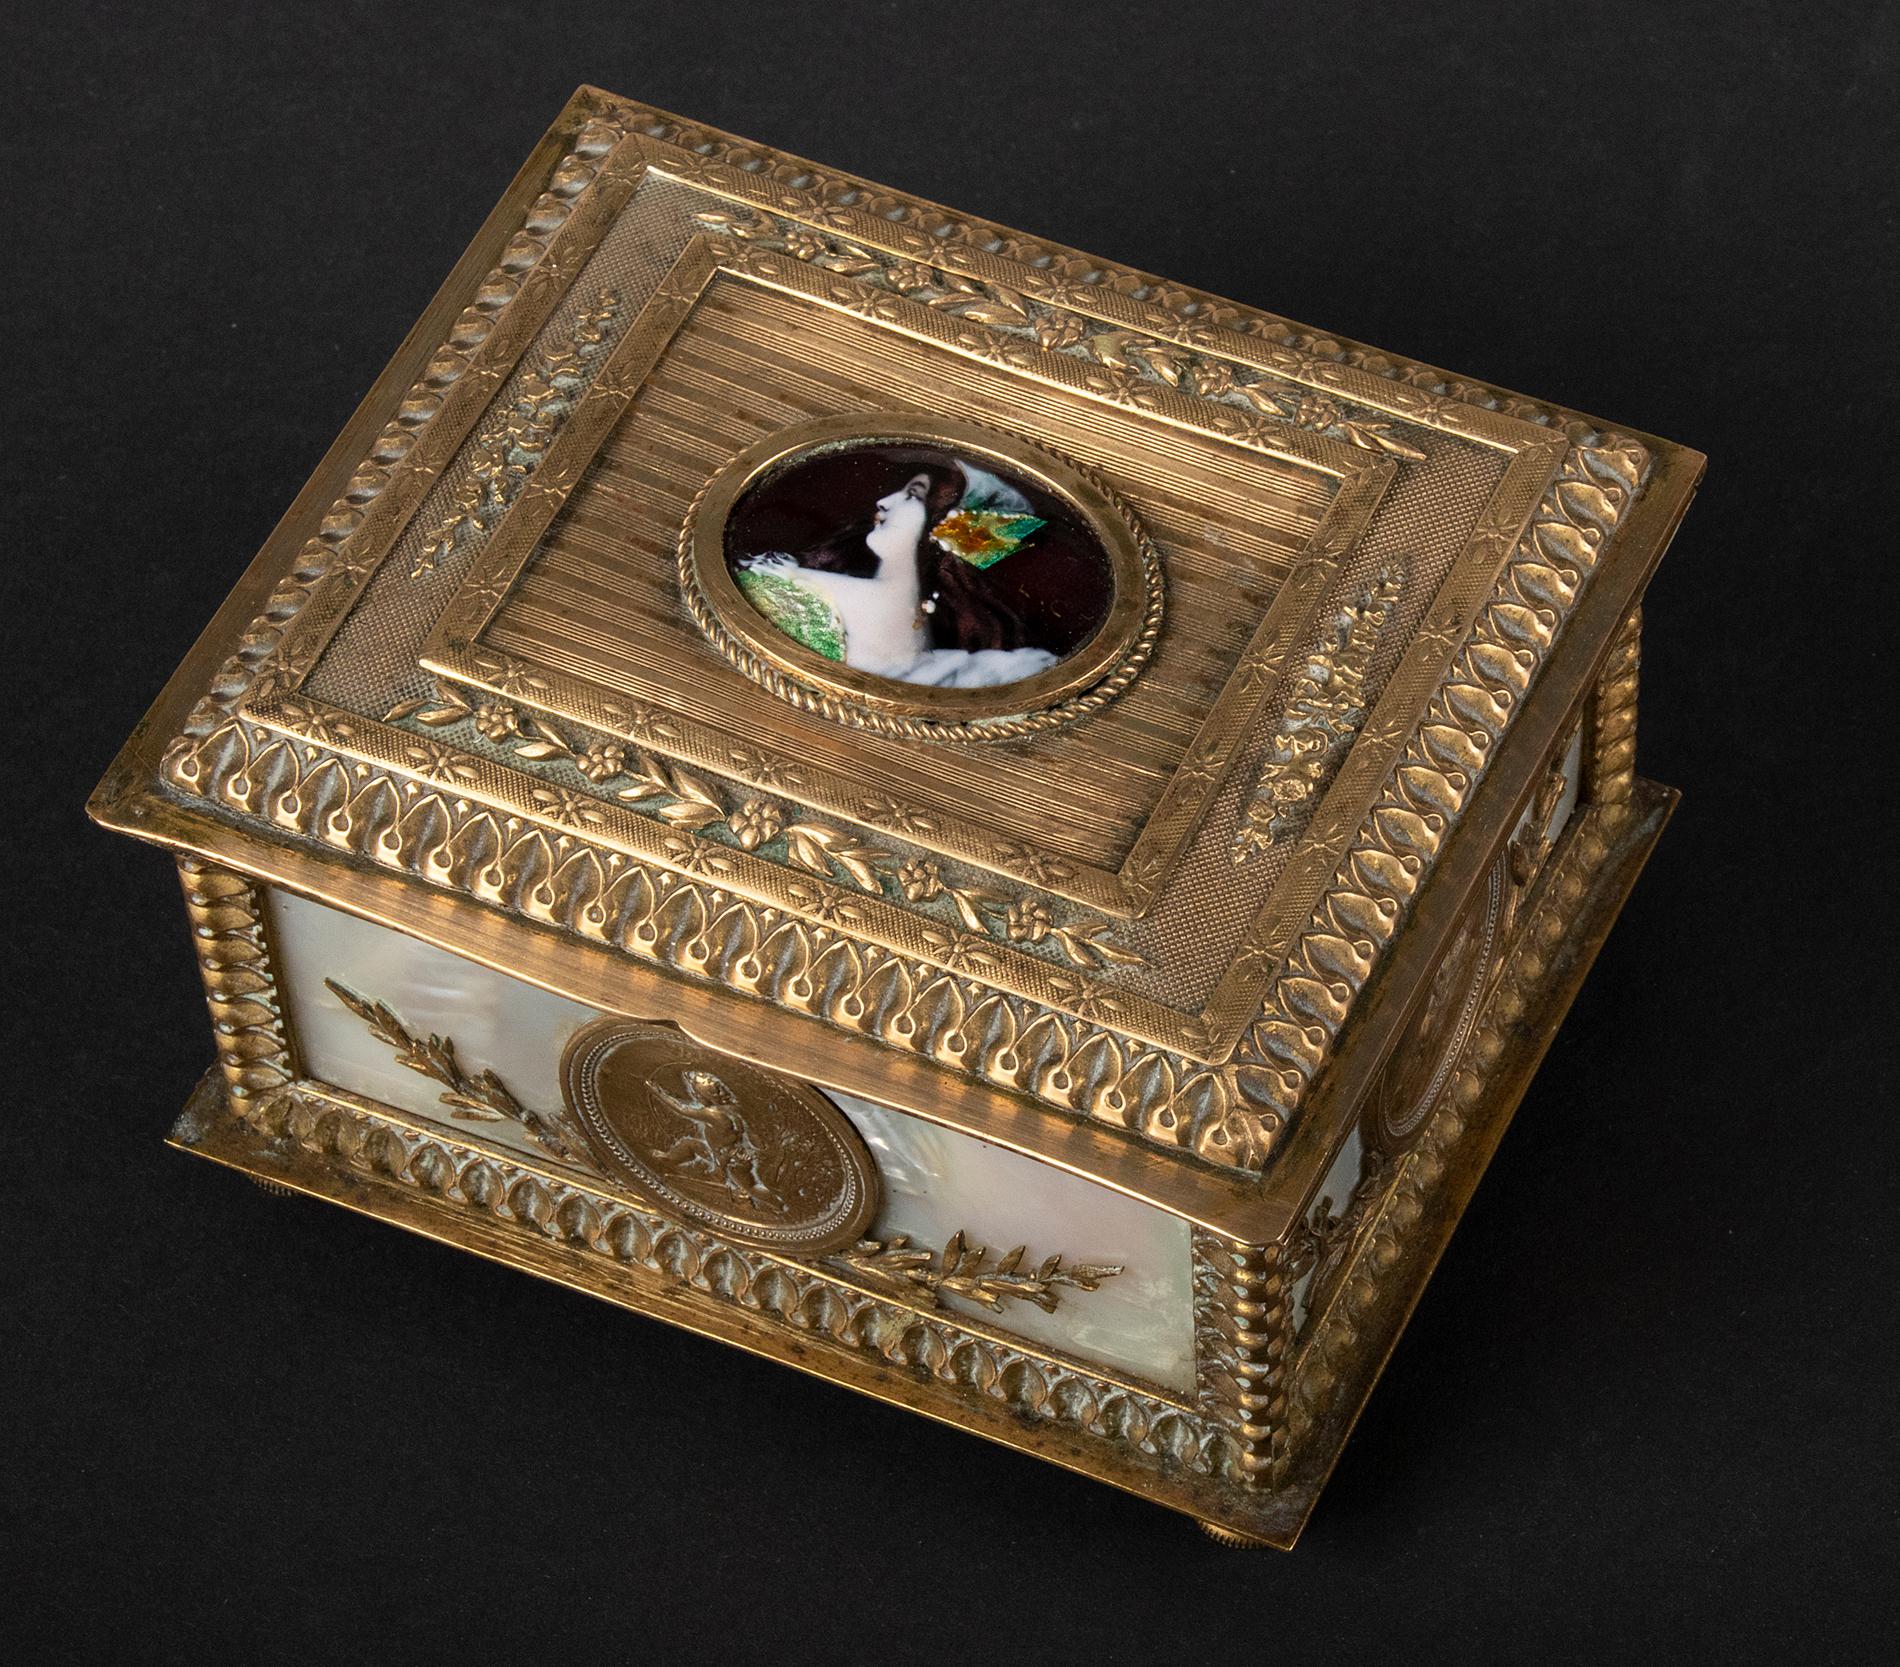 Napoleon III 19th Century Jewelery Box by JP Legastelois, Bronze with Mother of Pearl